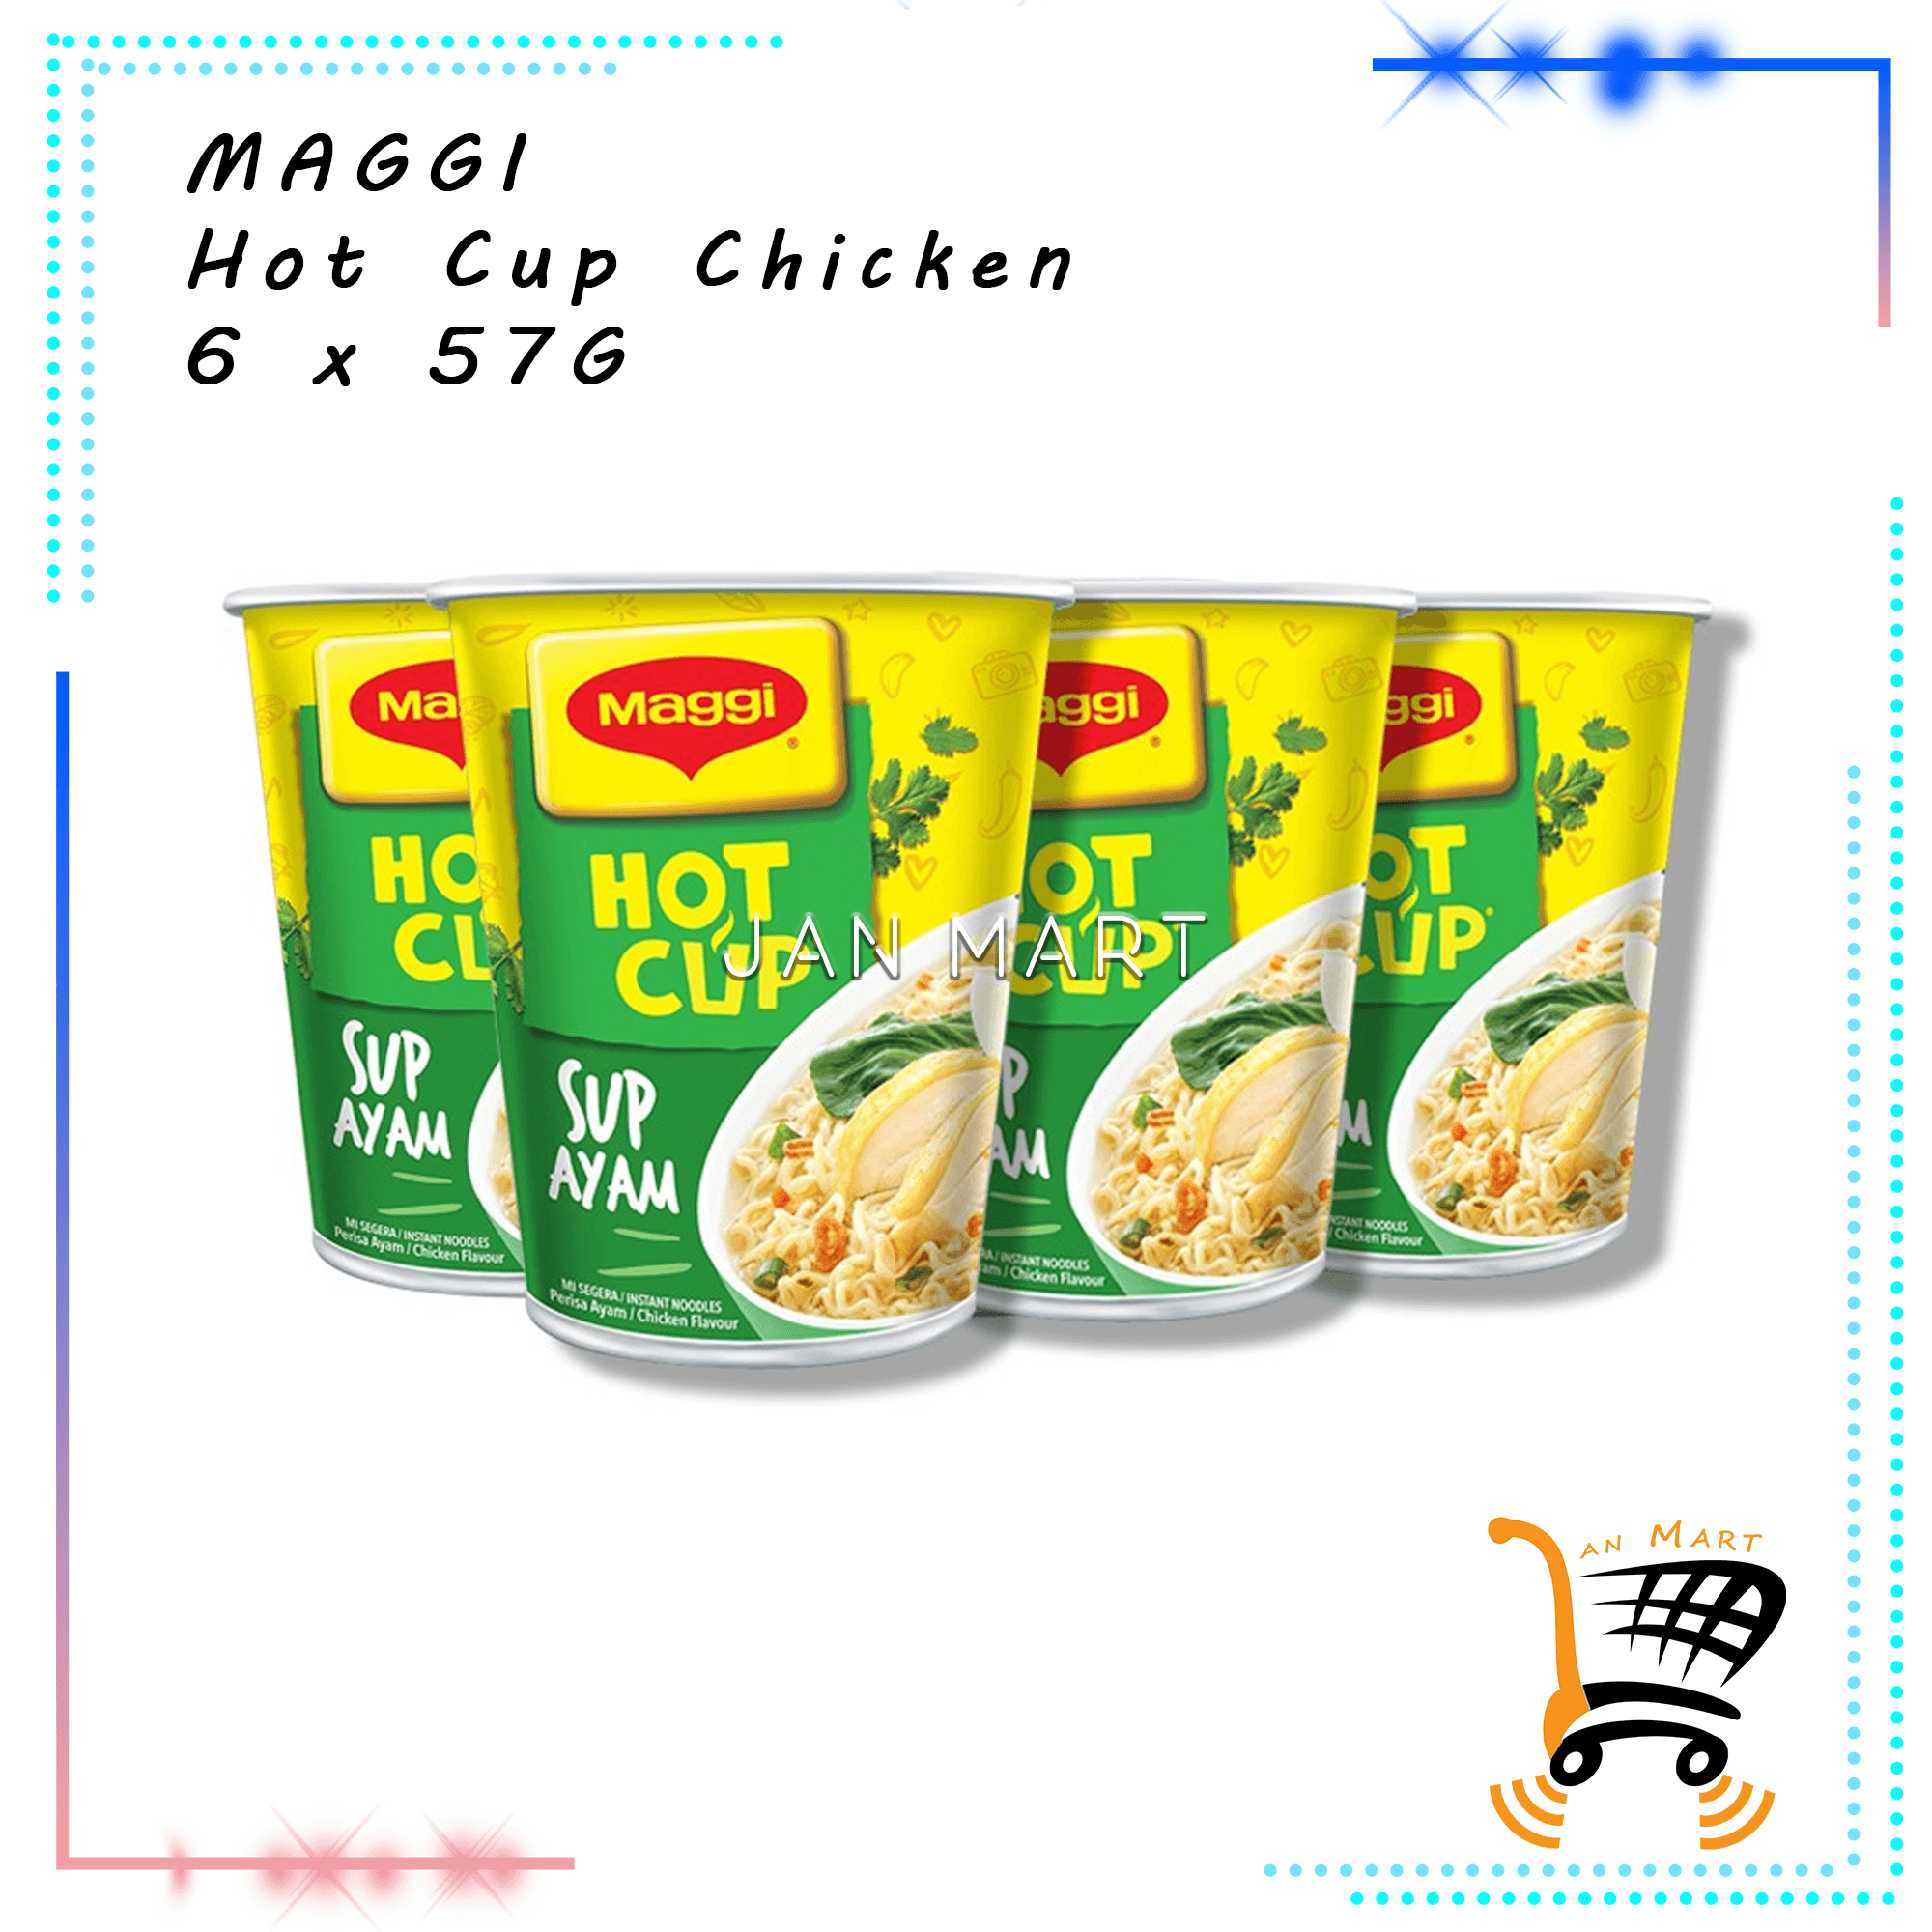 MAGGI Hot Cup Curry Chicken 6 x 59G / 57G